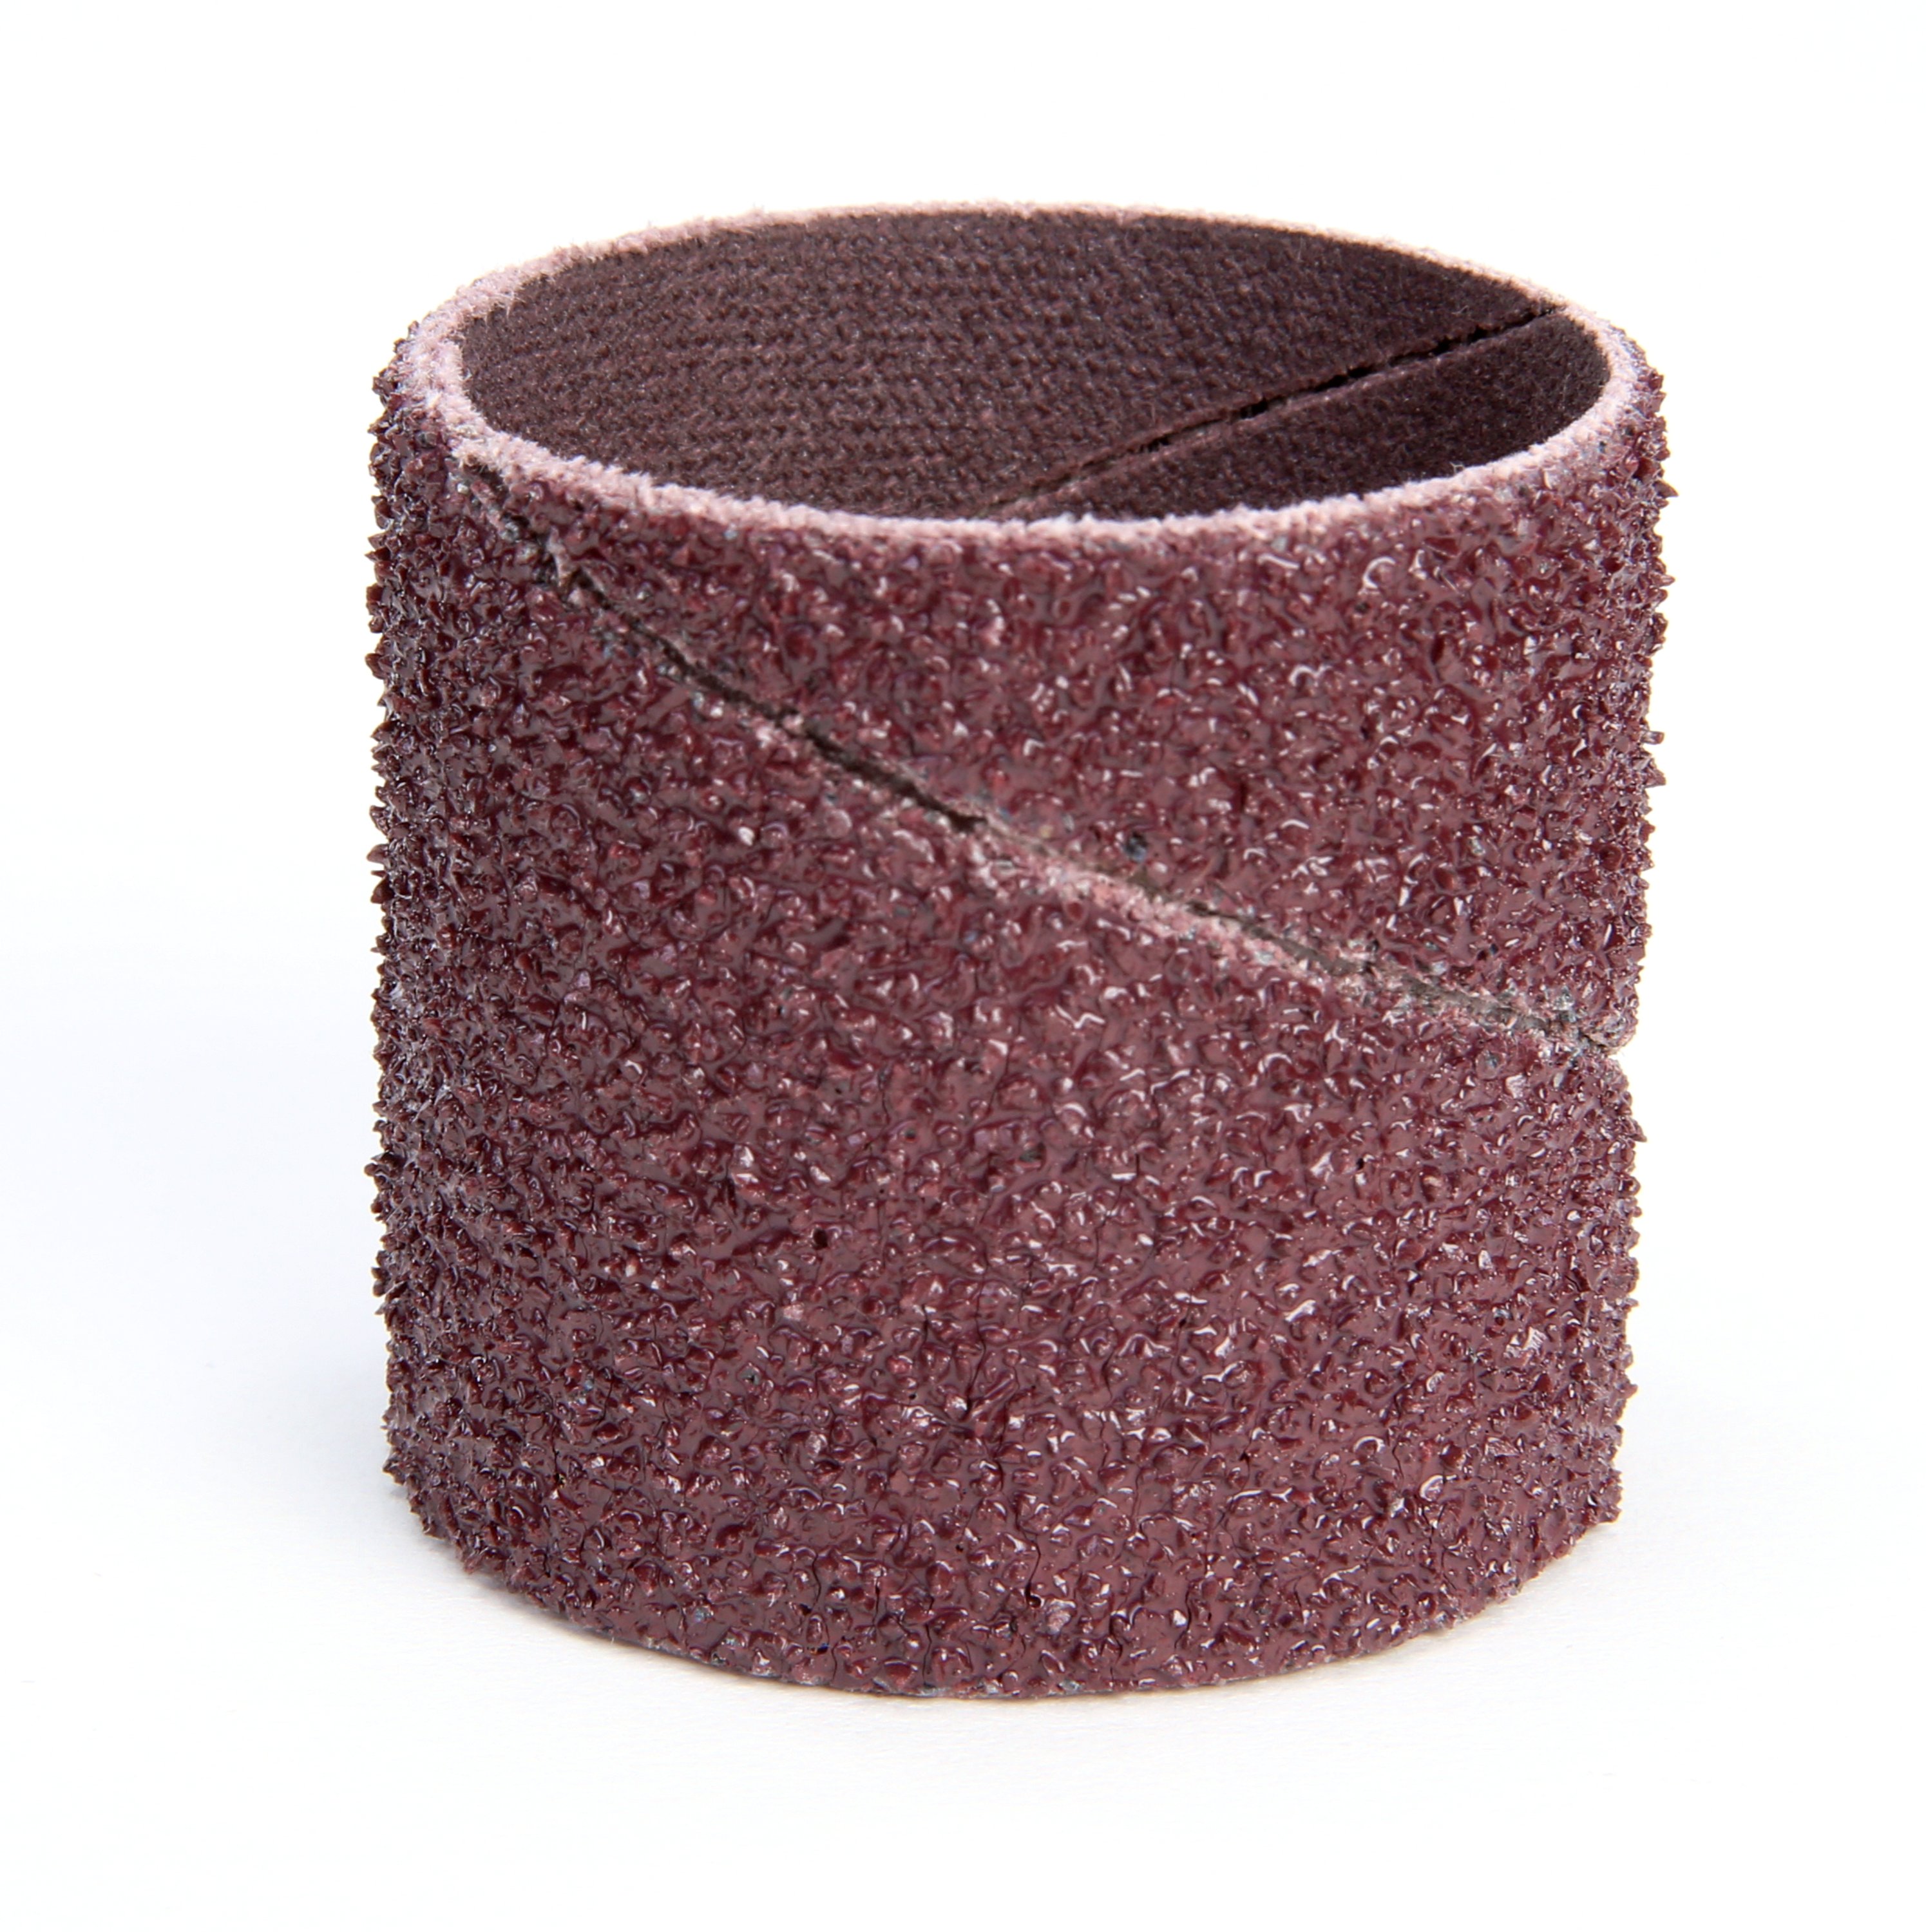 Standard Abrasives™ Aluminum Oxide Spiral Band is great for removing parting lines, tiny imperfections and little burrs, which could otherwise be difficult to remove with a larger abrasive disc or wheel.